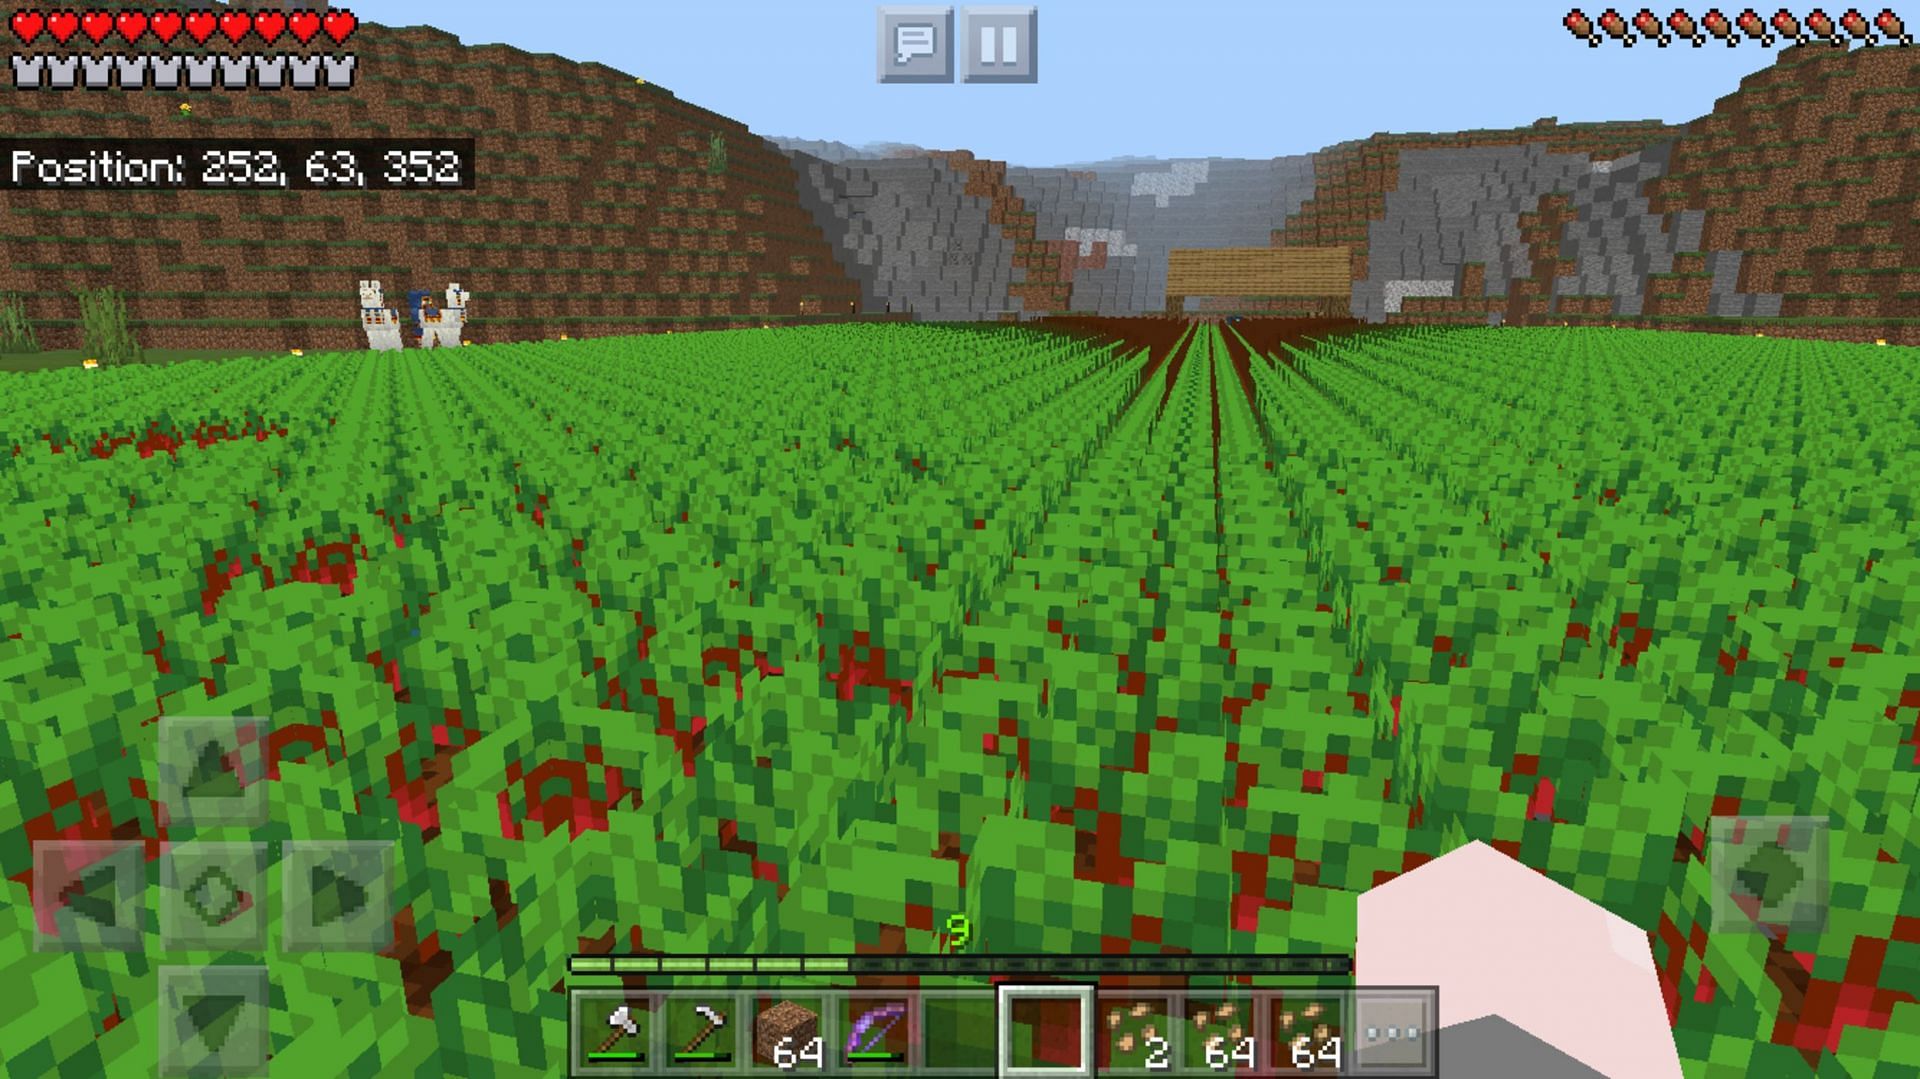 Beetroot farming in Minecraft can be made easier with automation (Image via u/Mcnkyrose/Reddit)